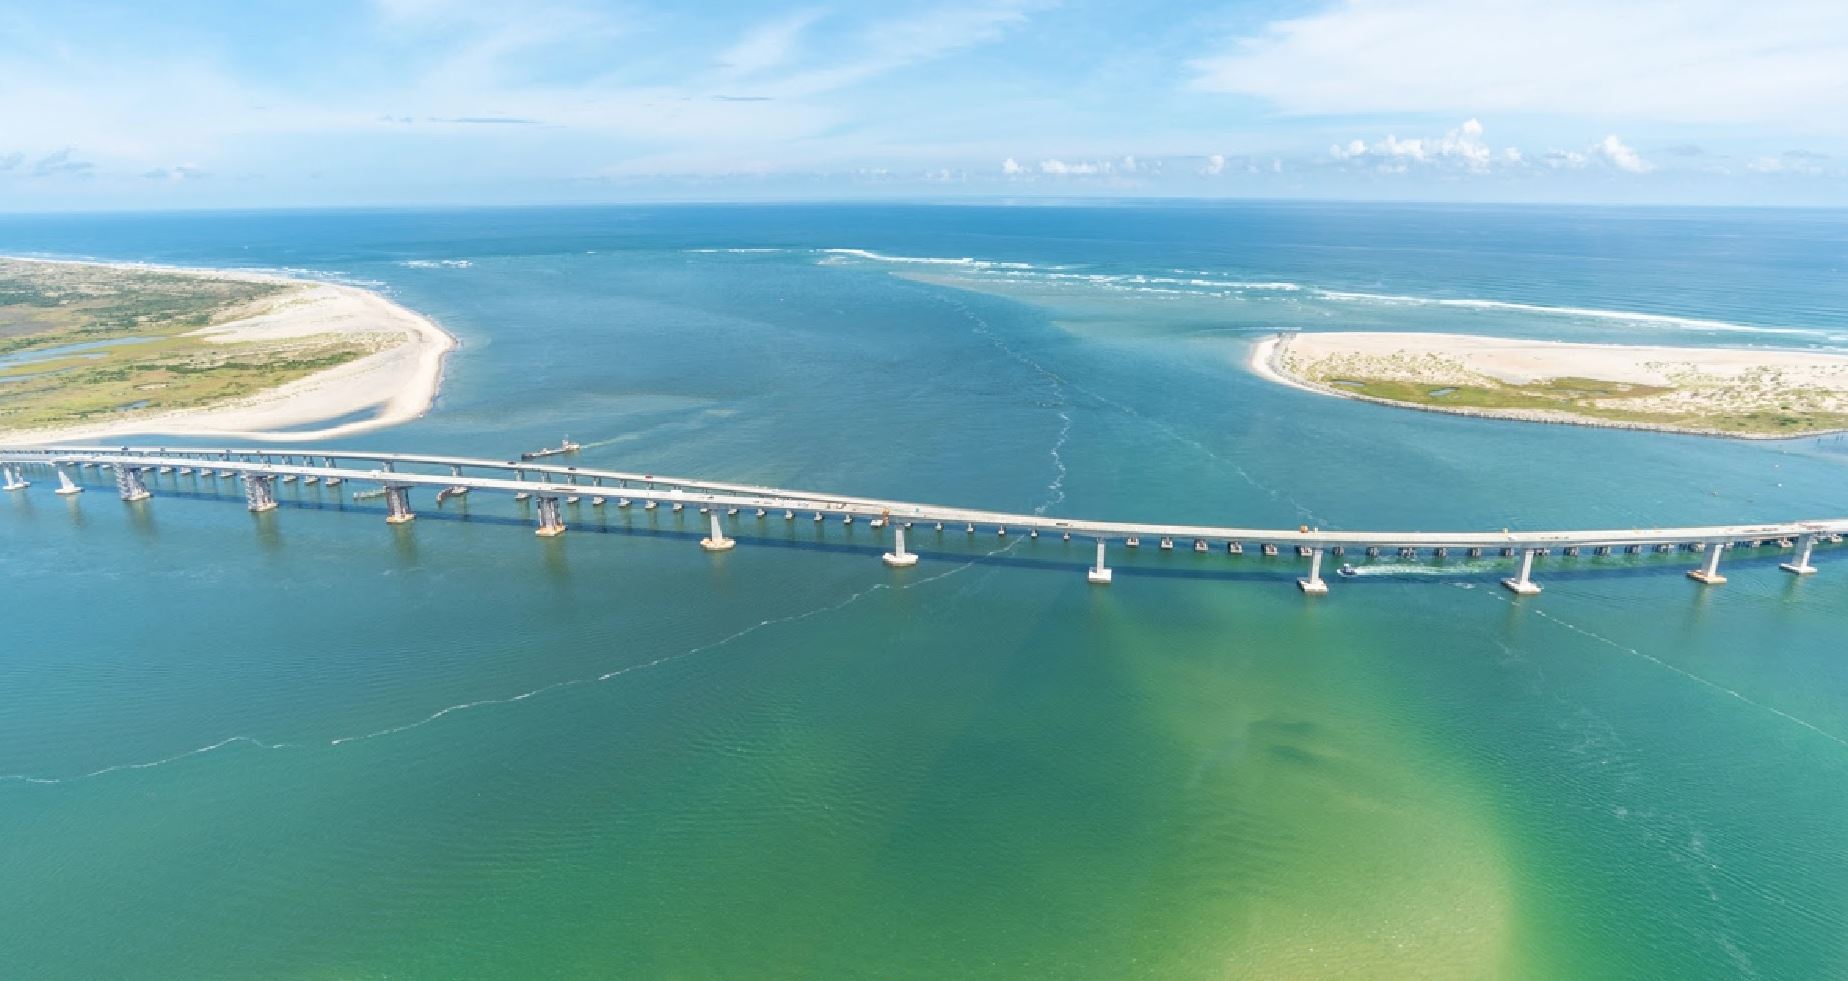 VIDEO: Congressman Murphy announces bill on feasibility study of jetties at Oregon Inlet